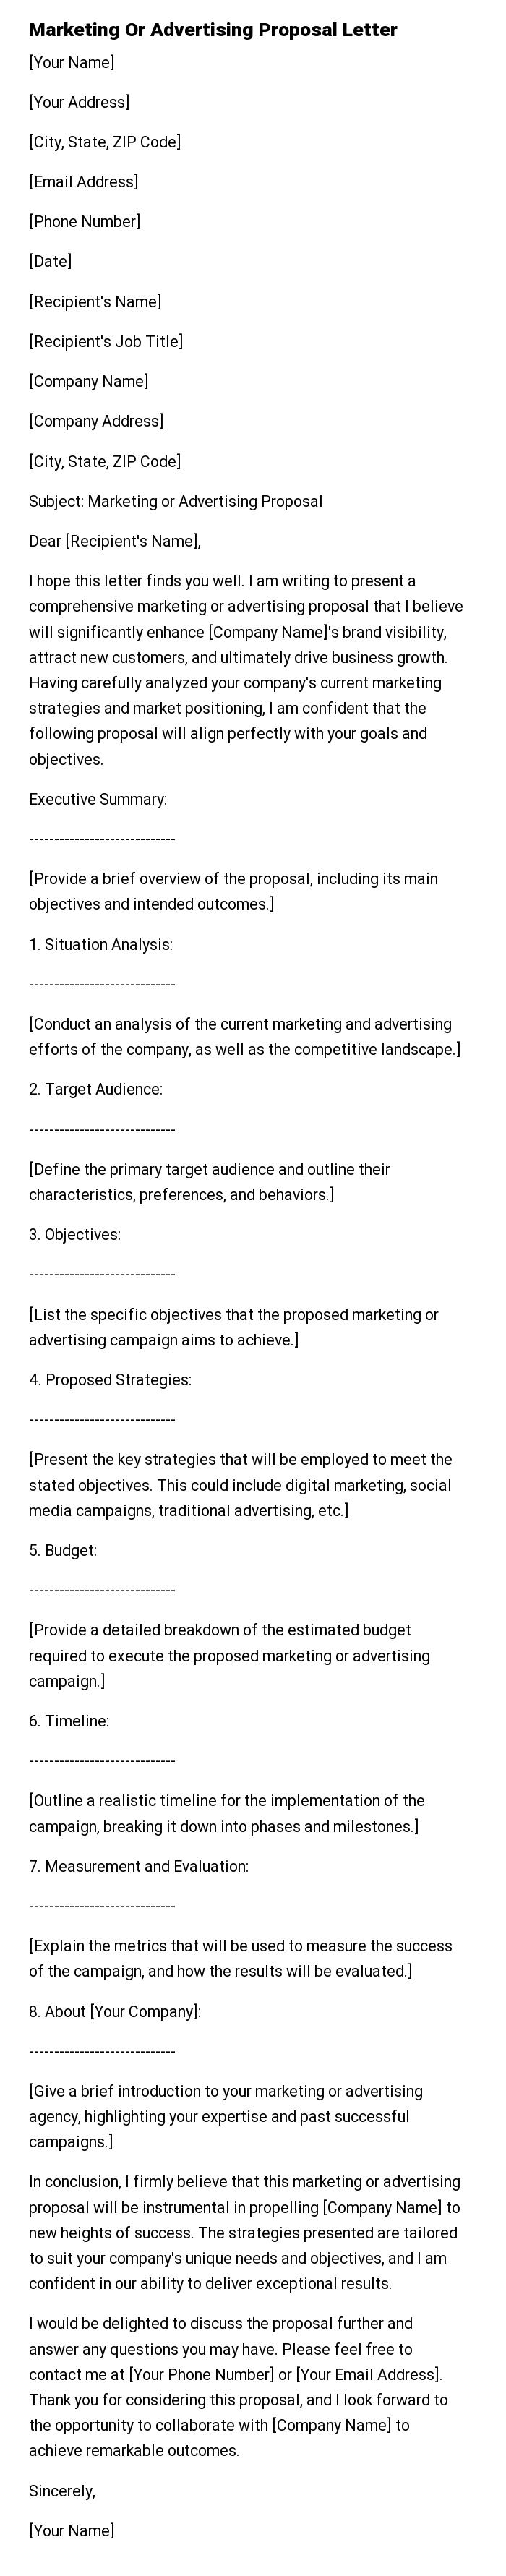 Marketing Or Advertising Proposal Letter